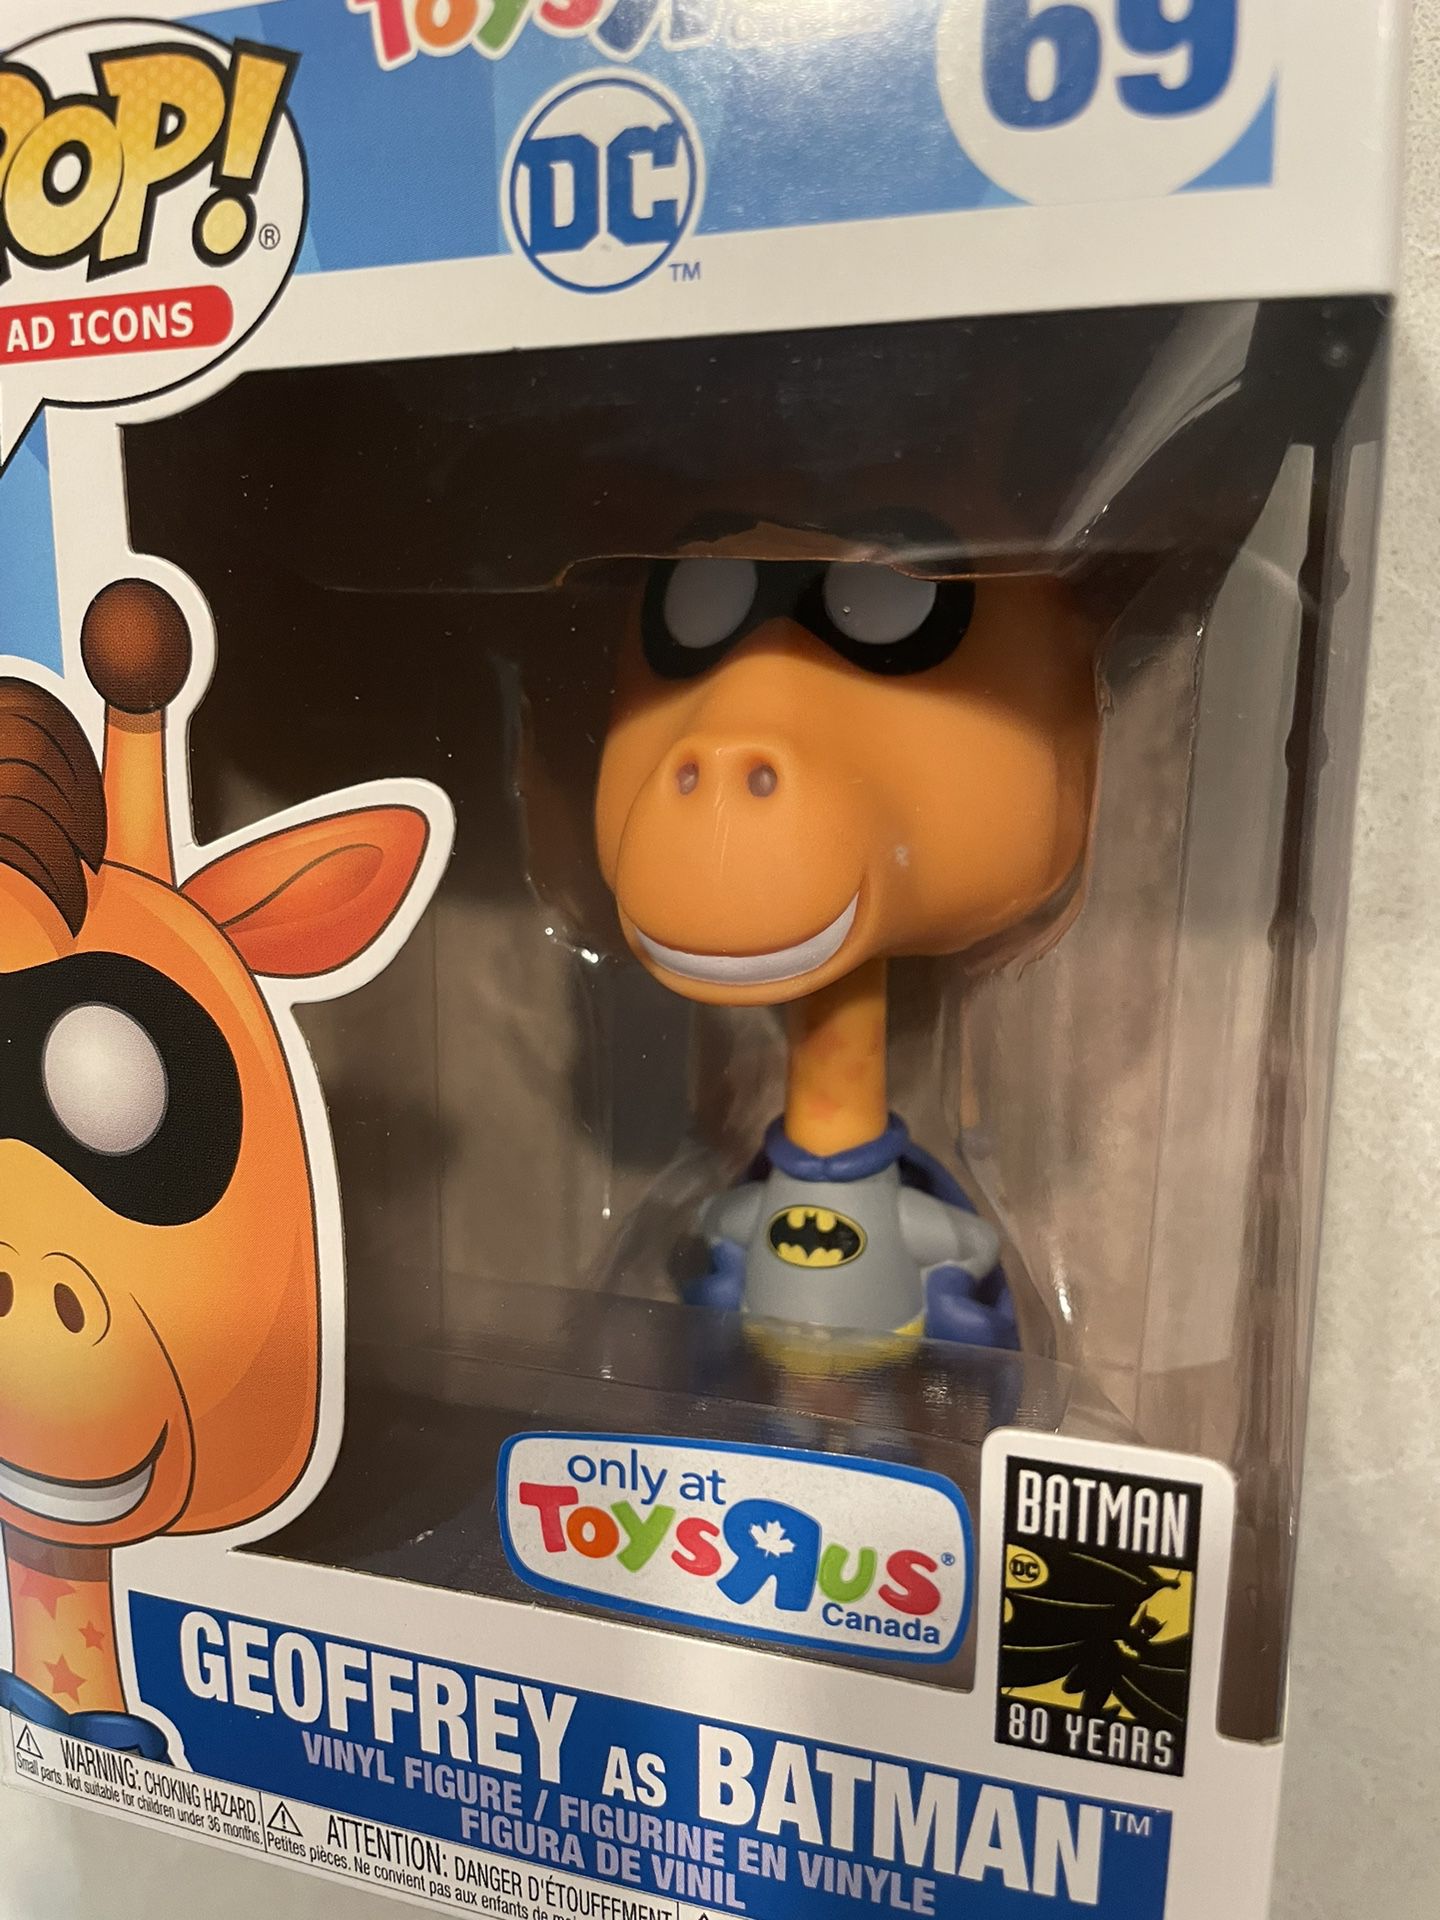 as Batman Funko Pop *MINT* Toys 'R' Us Canada Exclusive Ad Icons 69 with protector Bruce Wayne TRU Giraffe for in Lewisville, - OfferUp